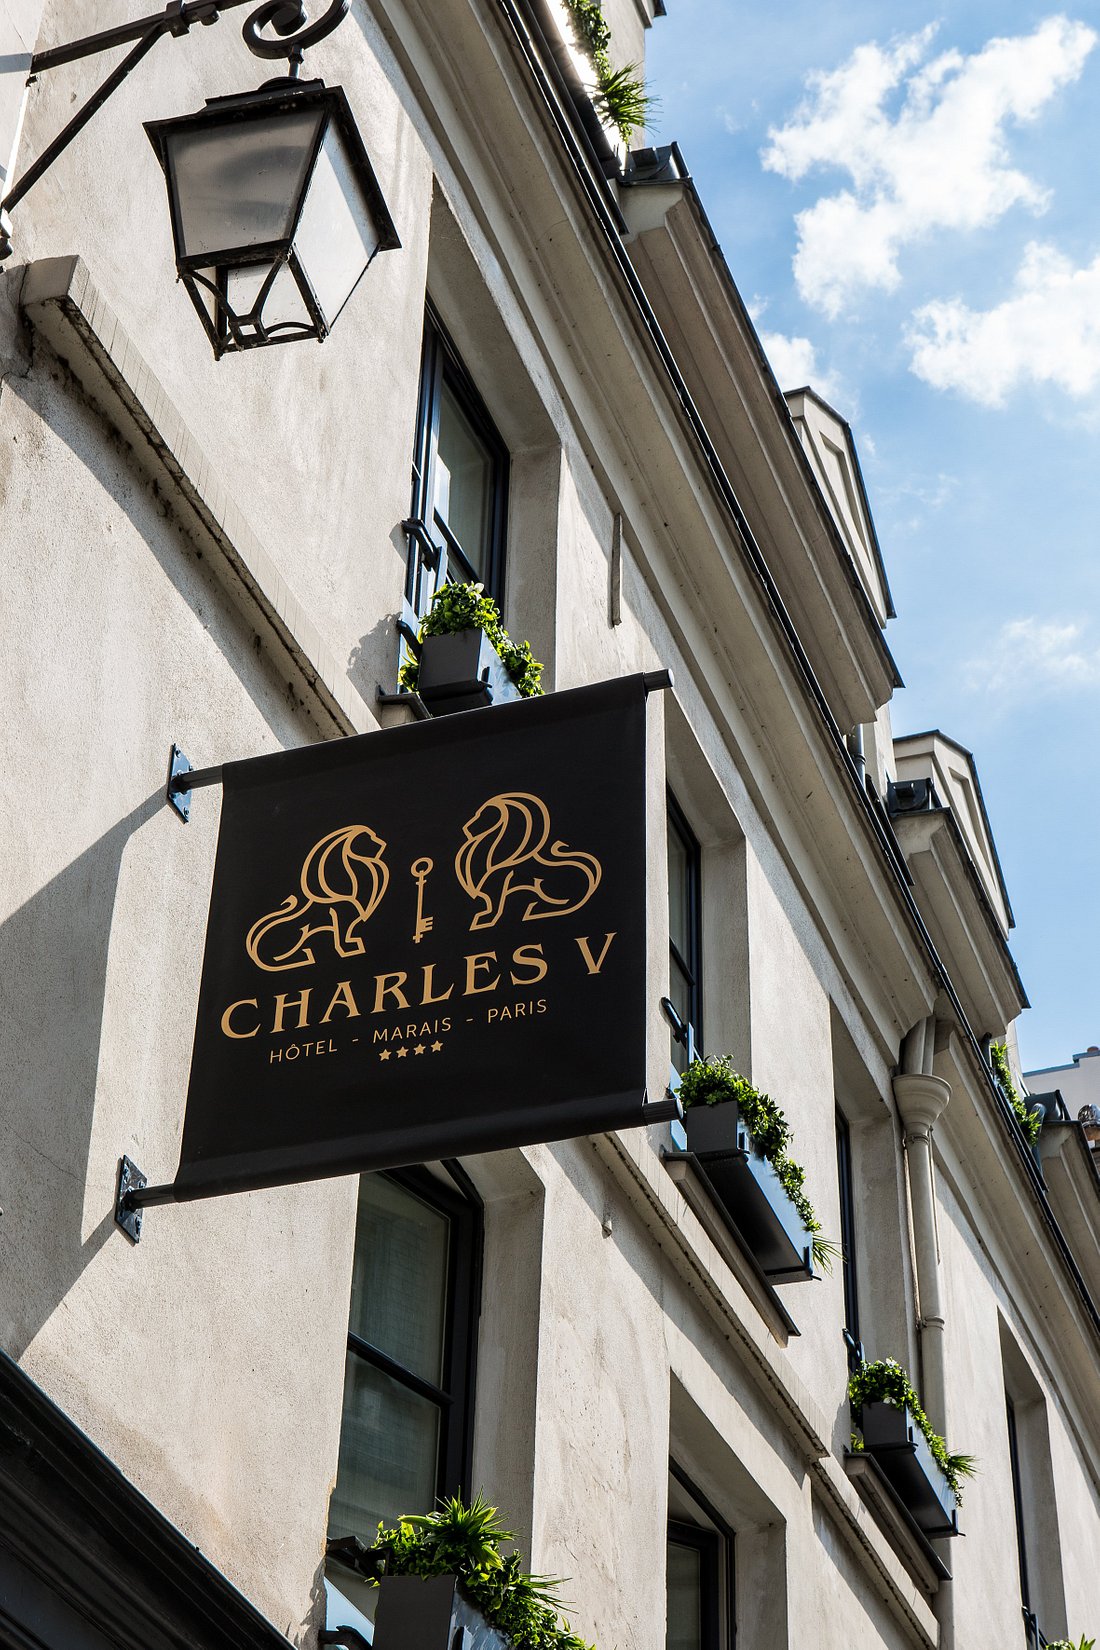 HOTEL CHARLES V - Prices & Boutique Hotel Reviews (Paris, France)